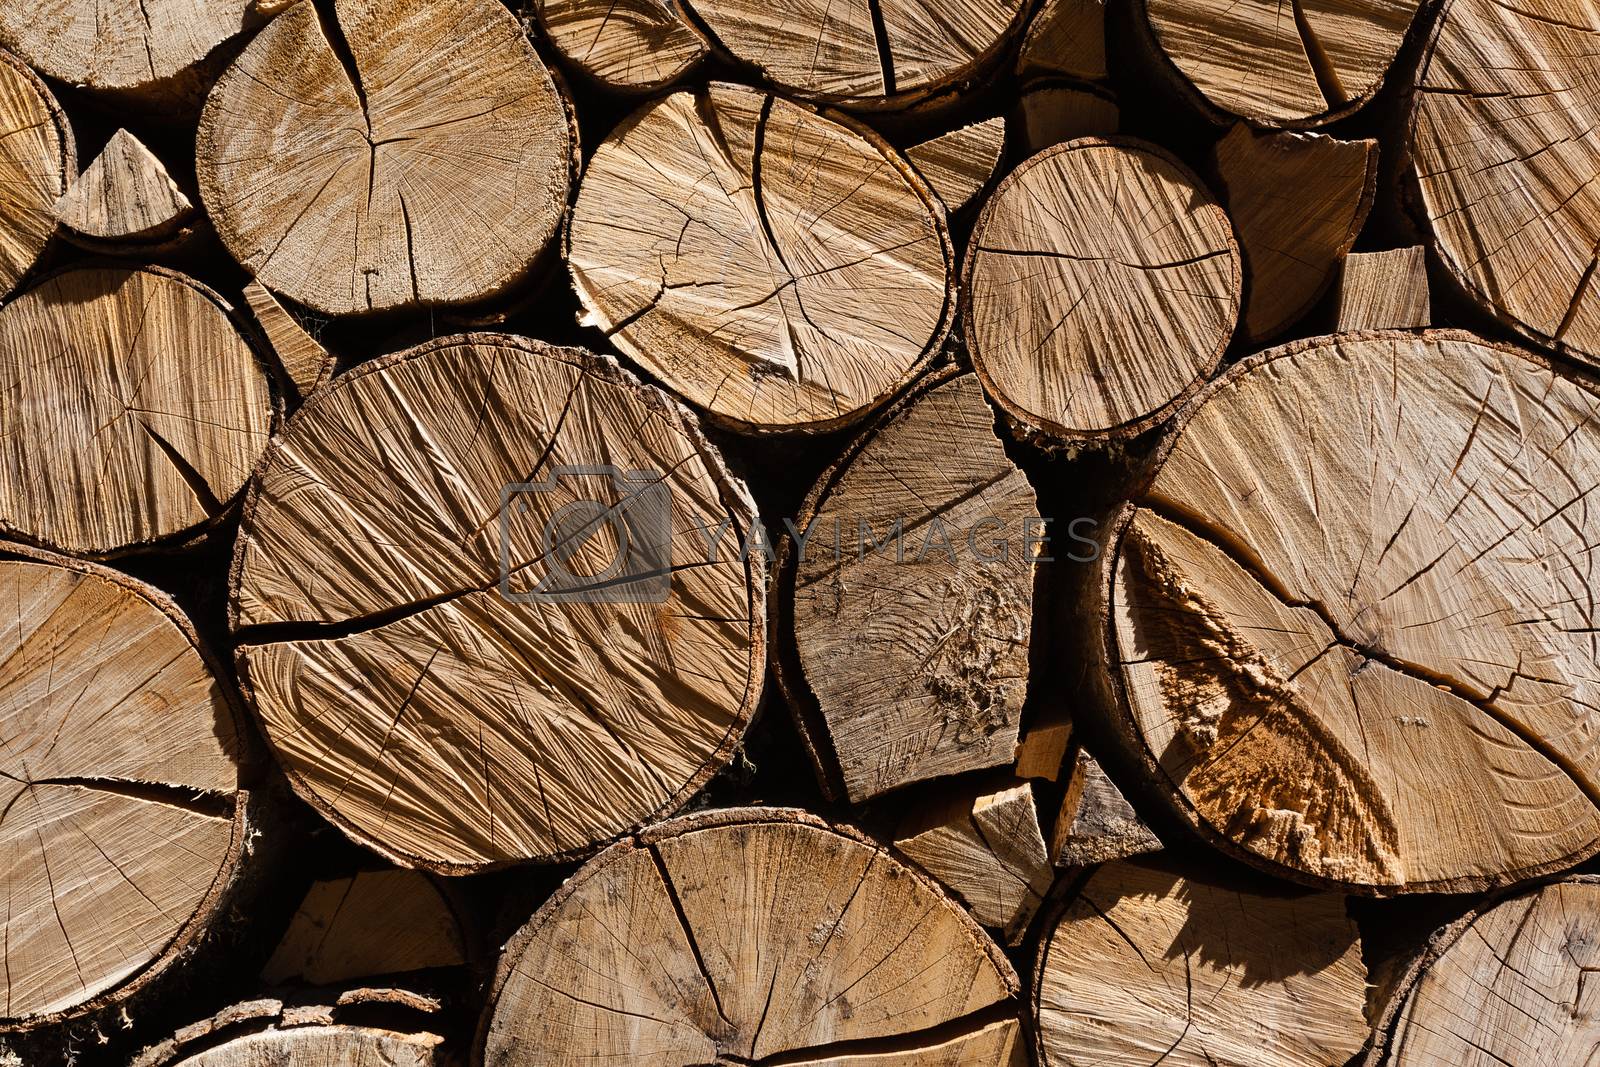 Royalty free image of horizontal squeezed logs by imagsan